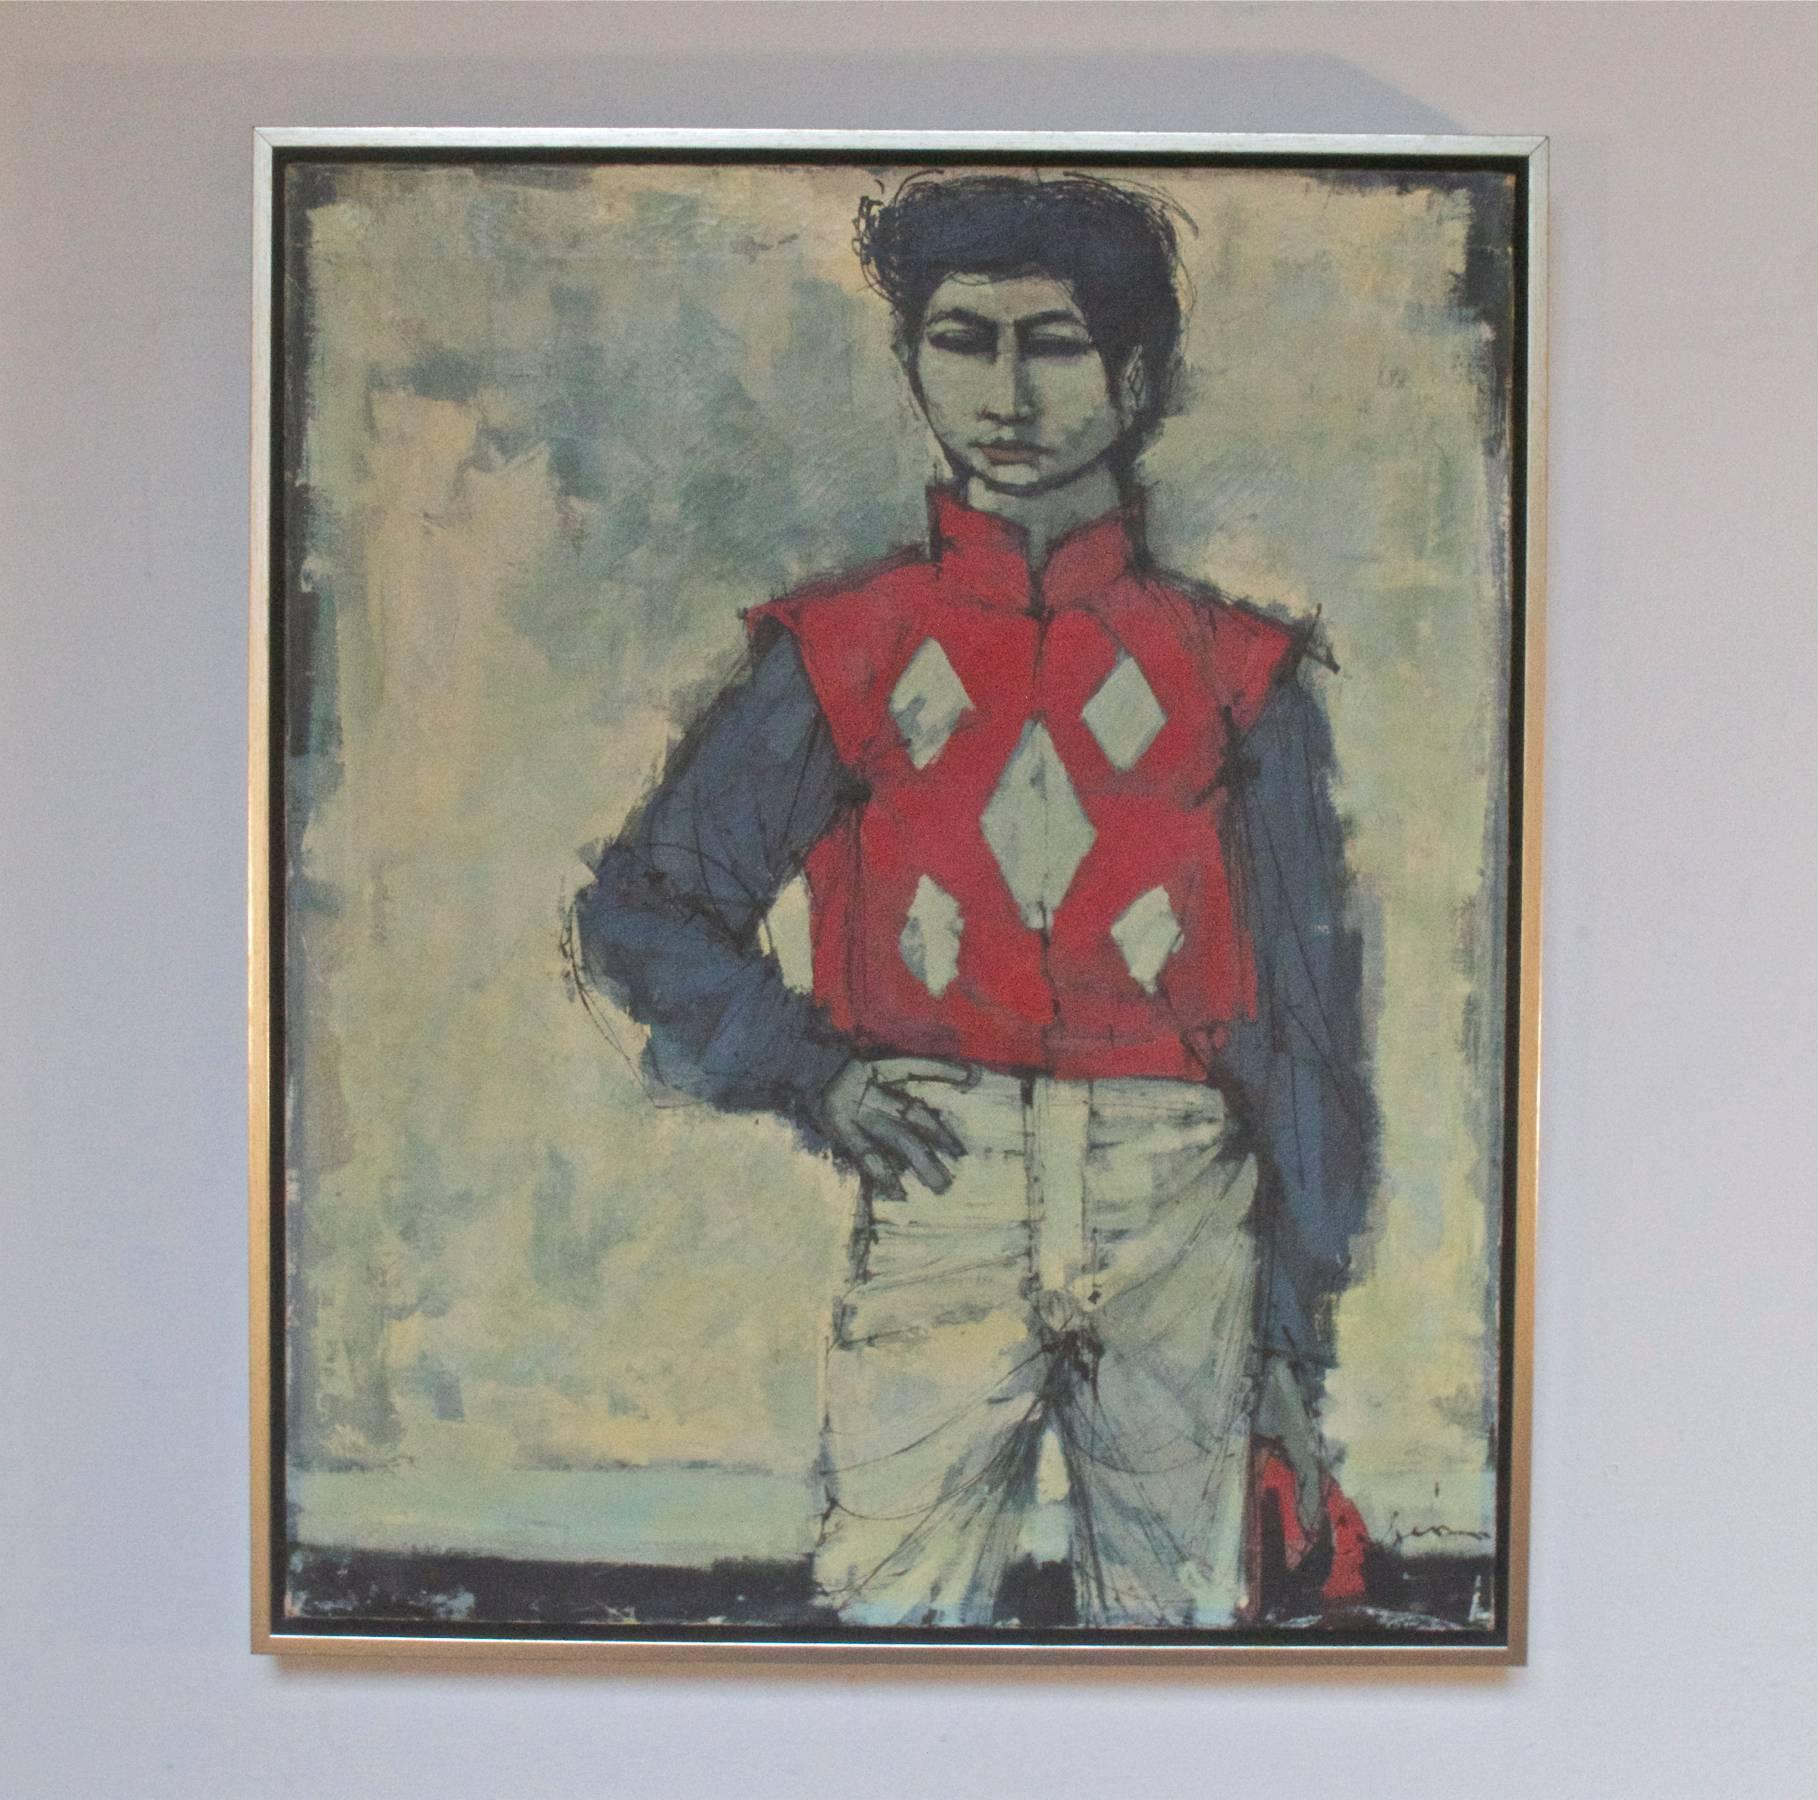 Charming oil on canvas of a proud and thoughtful jockey by American born painter Larry Cabaniss, (1926-2007) born in Akron, Ohio yet spent much of his adult life shying away from American life by taking up residence in Rome and Paris where he